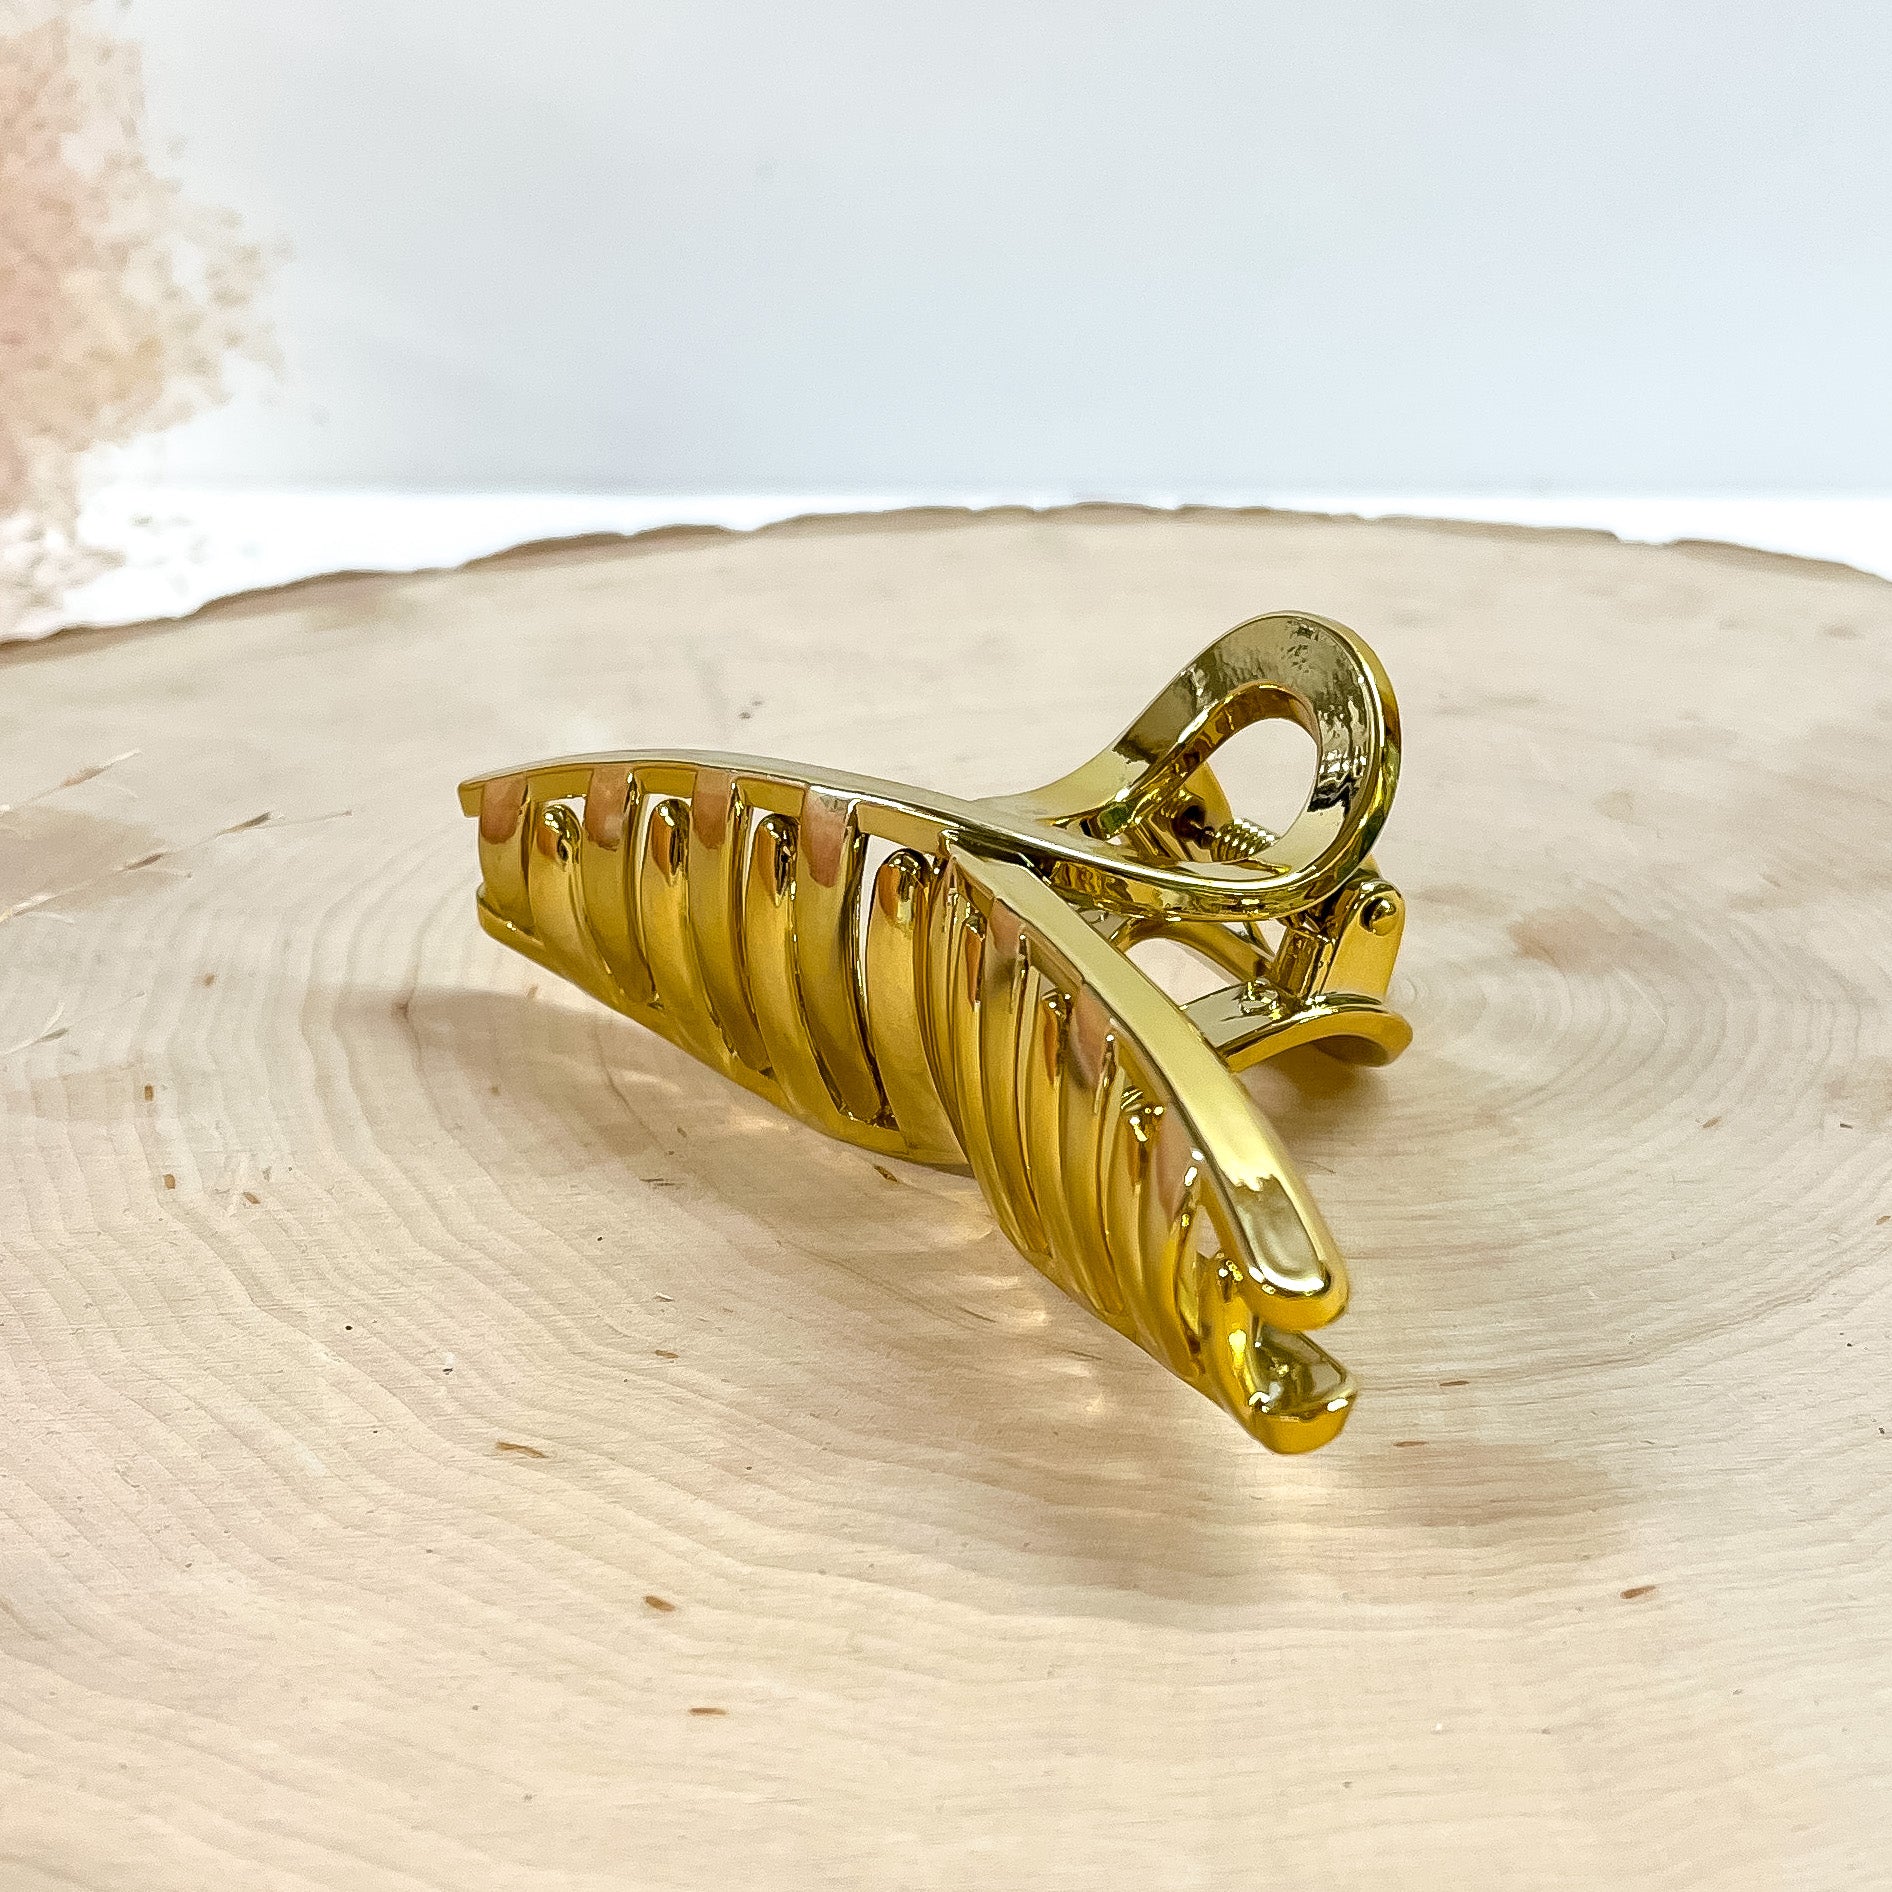 This is a long loop metallic hair clip in gold,  this clip is taken on a  slab of wood and in white background with a plant in the side as decor.